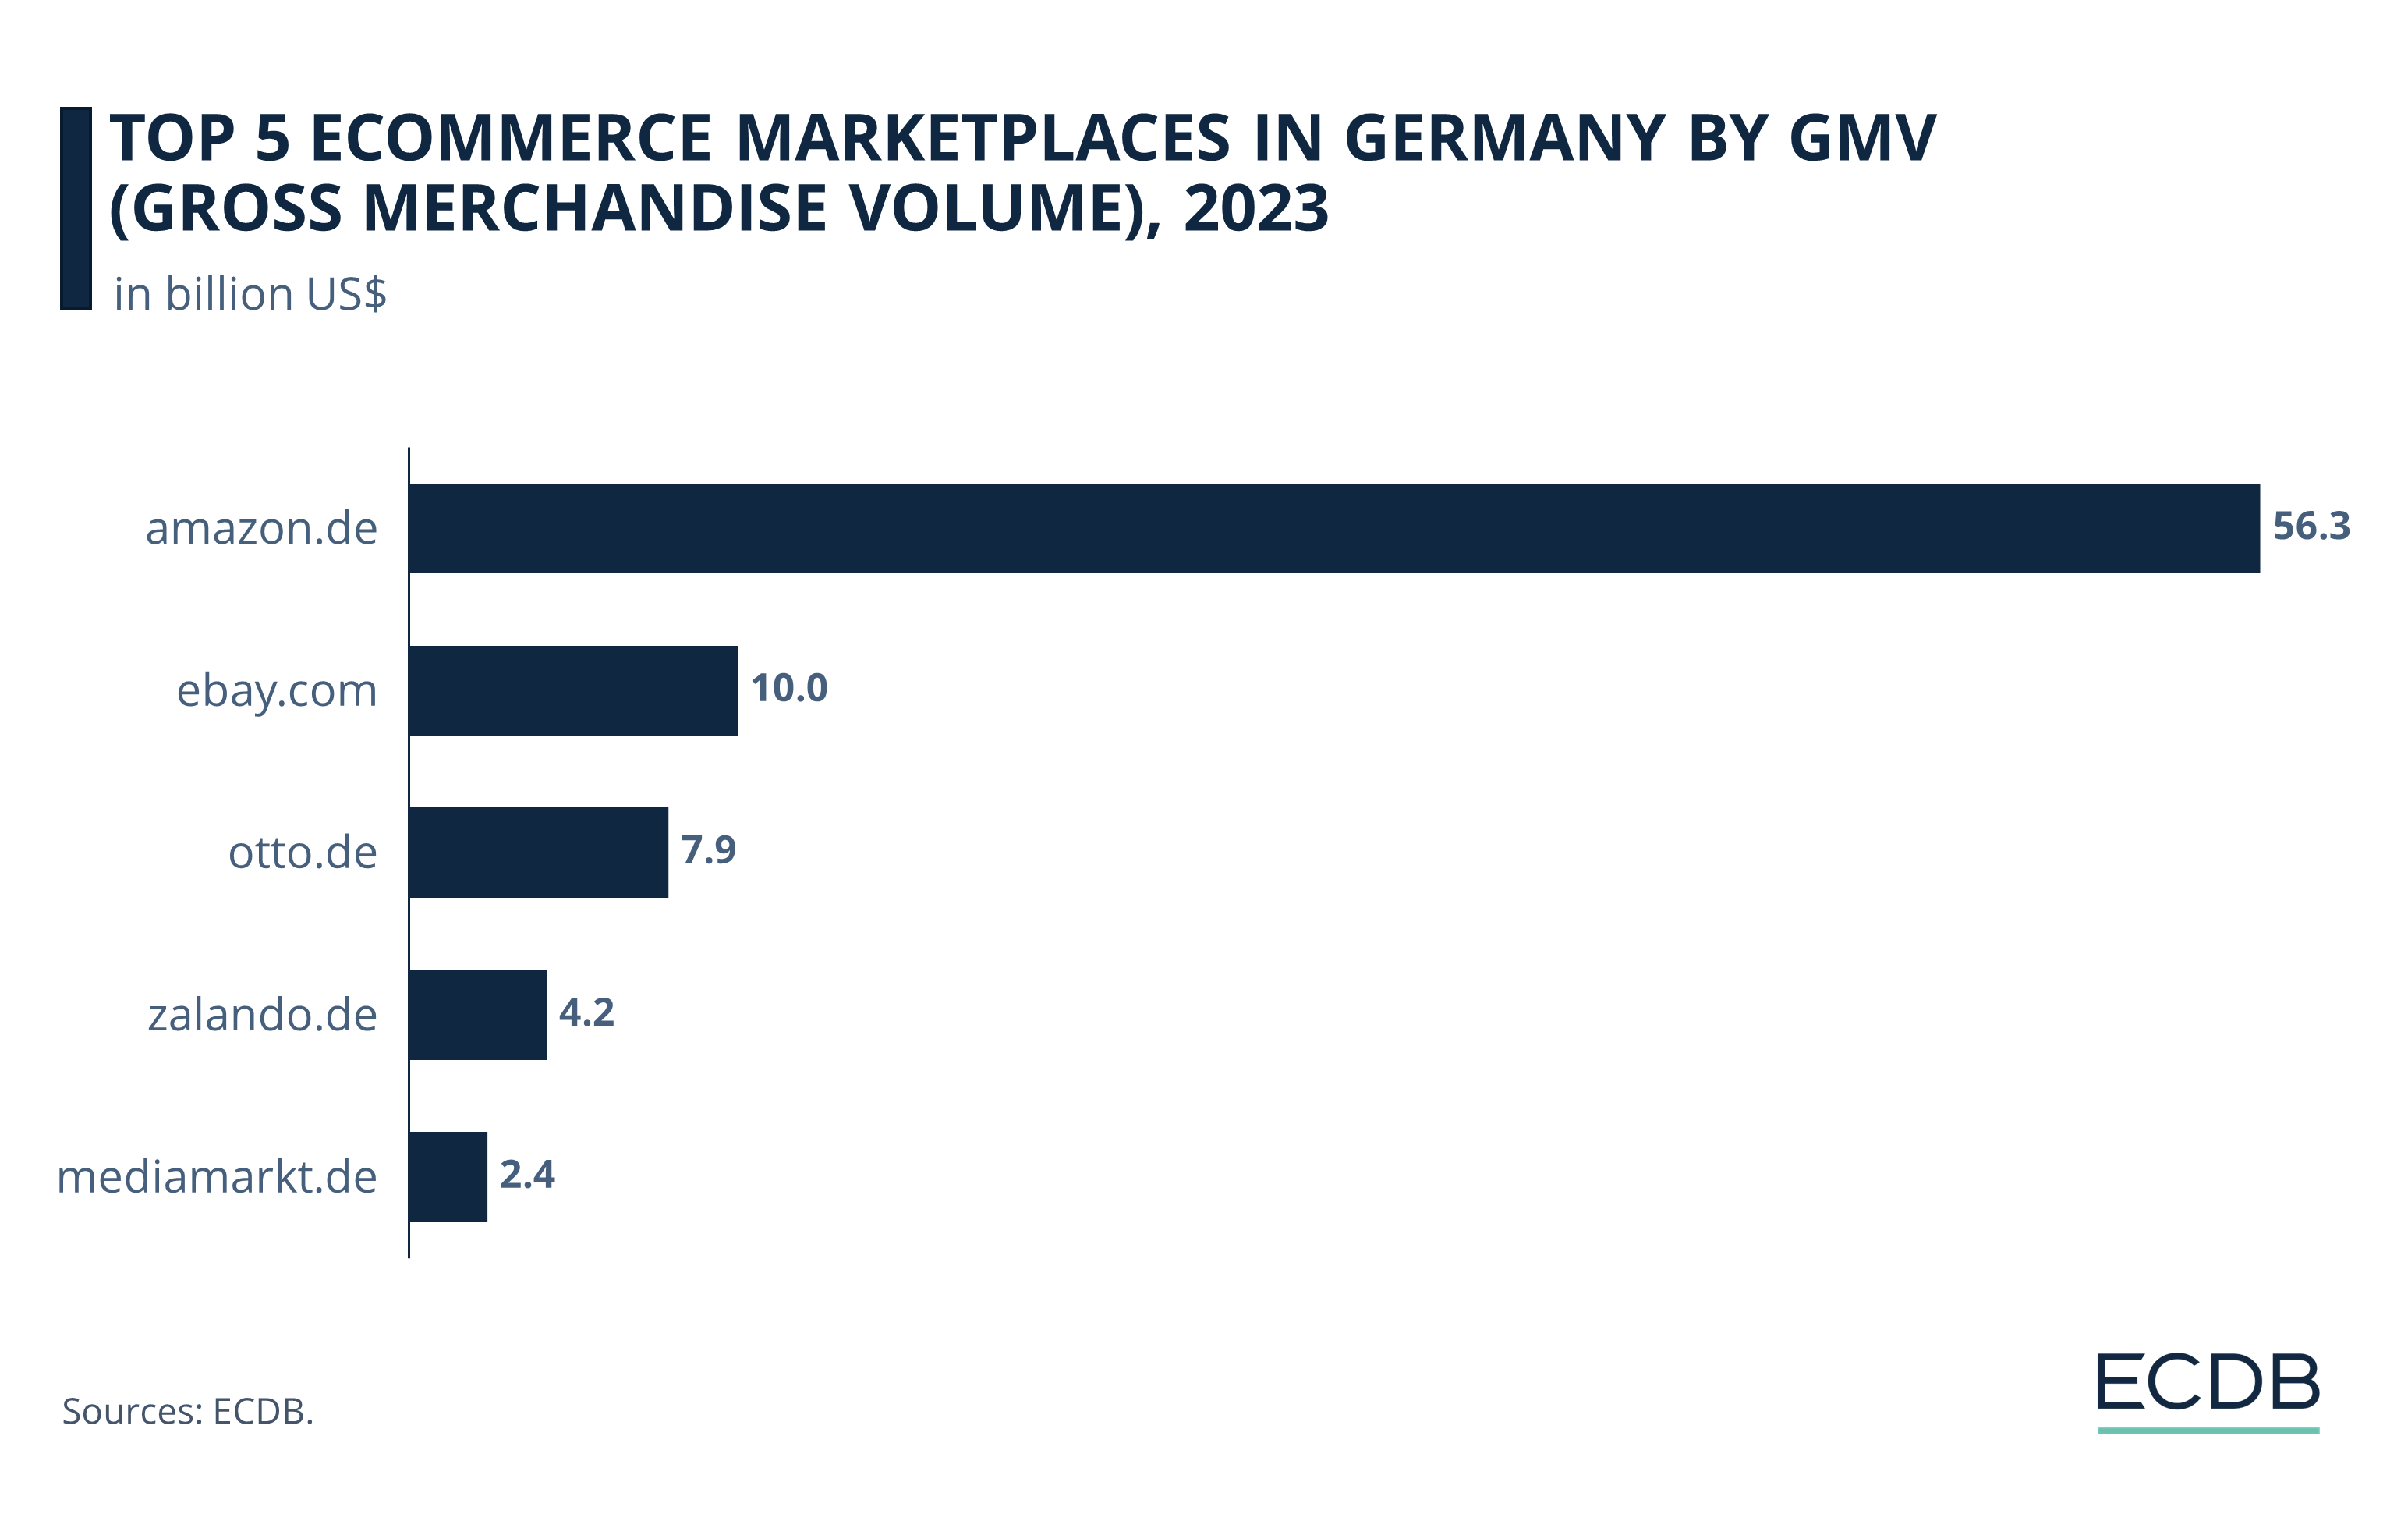 Top 5 eCommerce Marketplaces in Germany by GMV, 2023